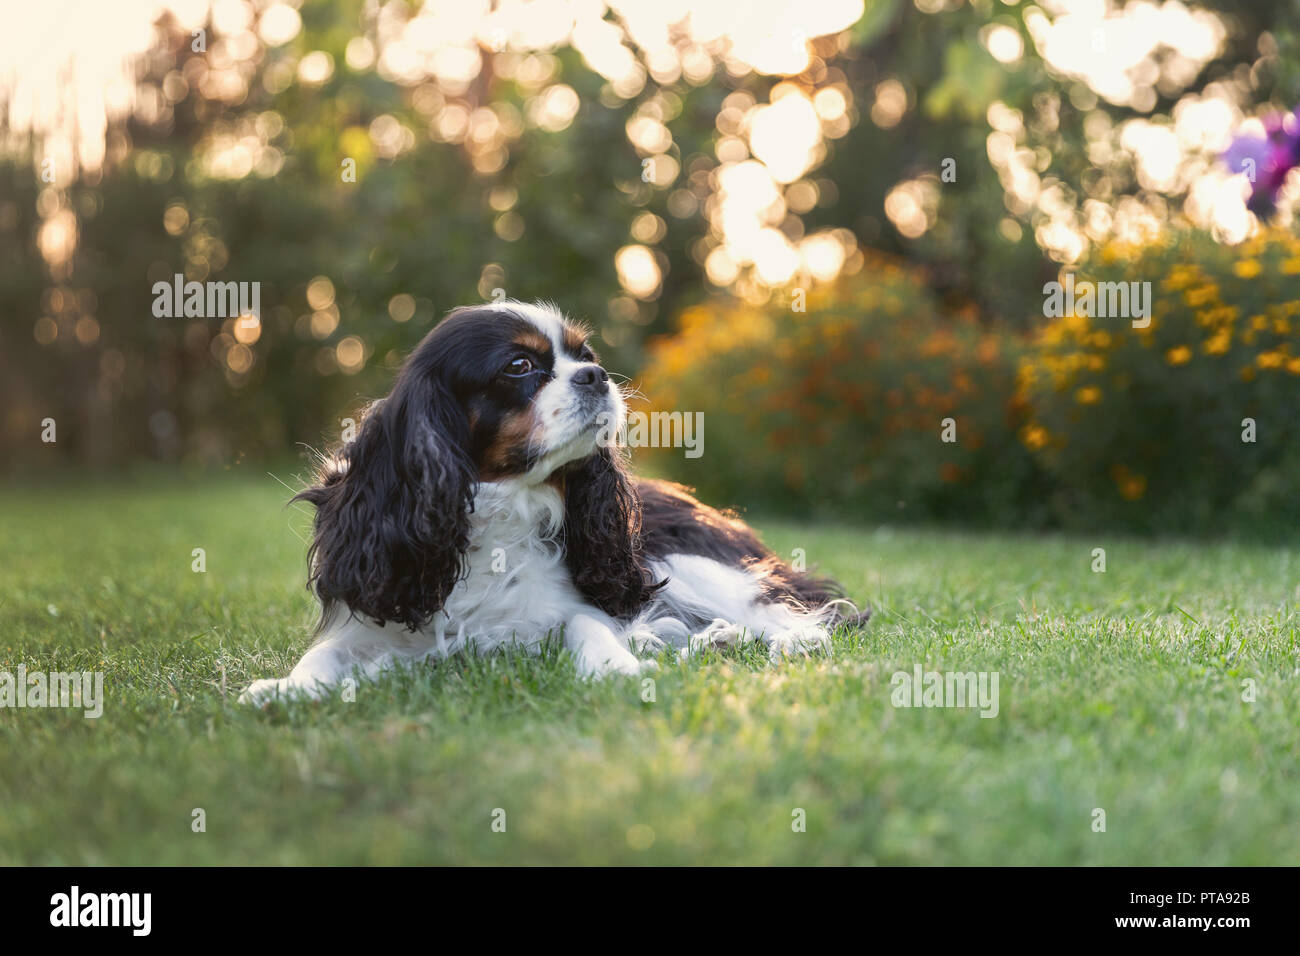 Cute dog lying on the grass in sunset light Stock Photo